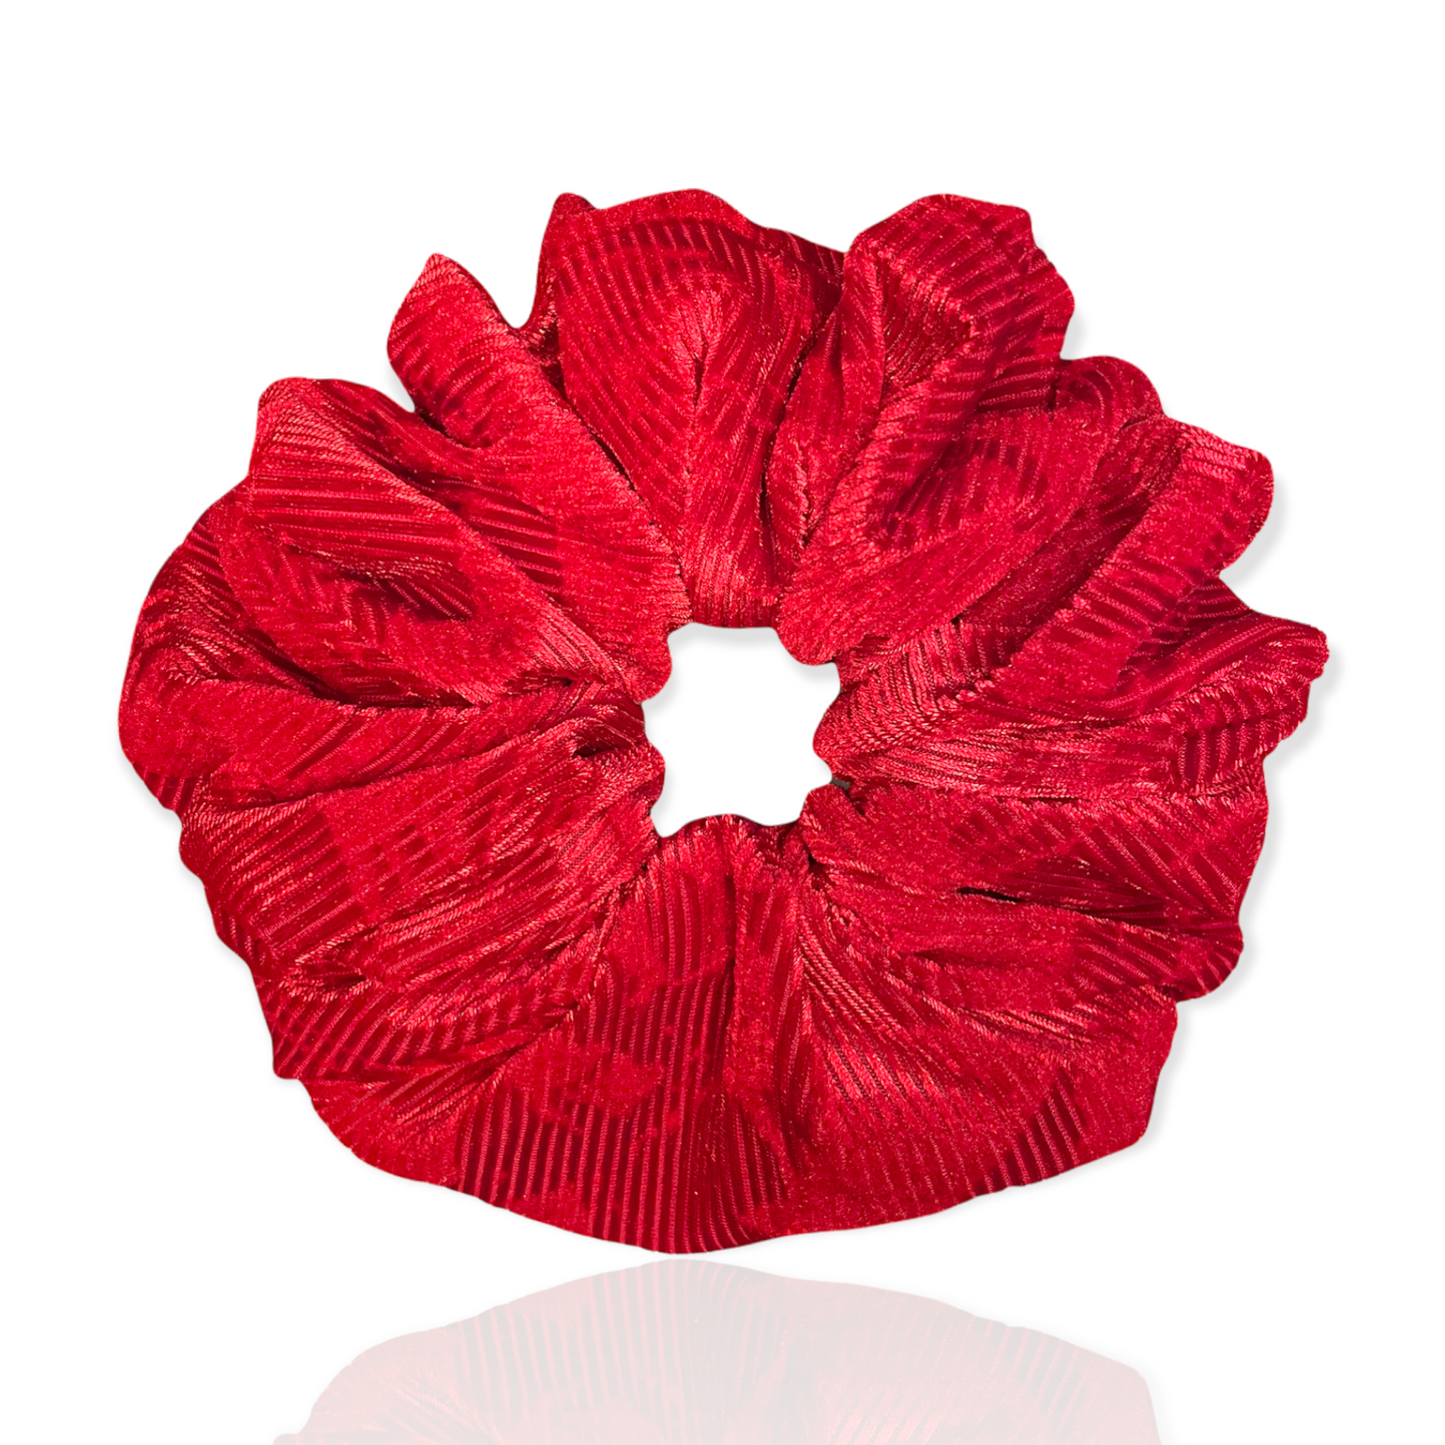 Oversized red corduroy soft scrunchie with zipper.